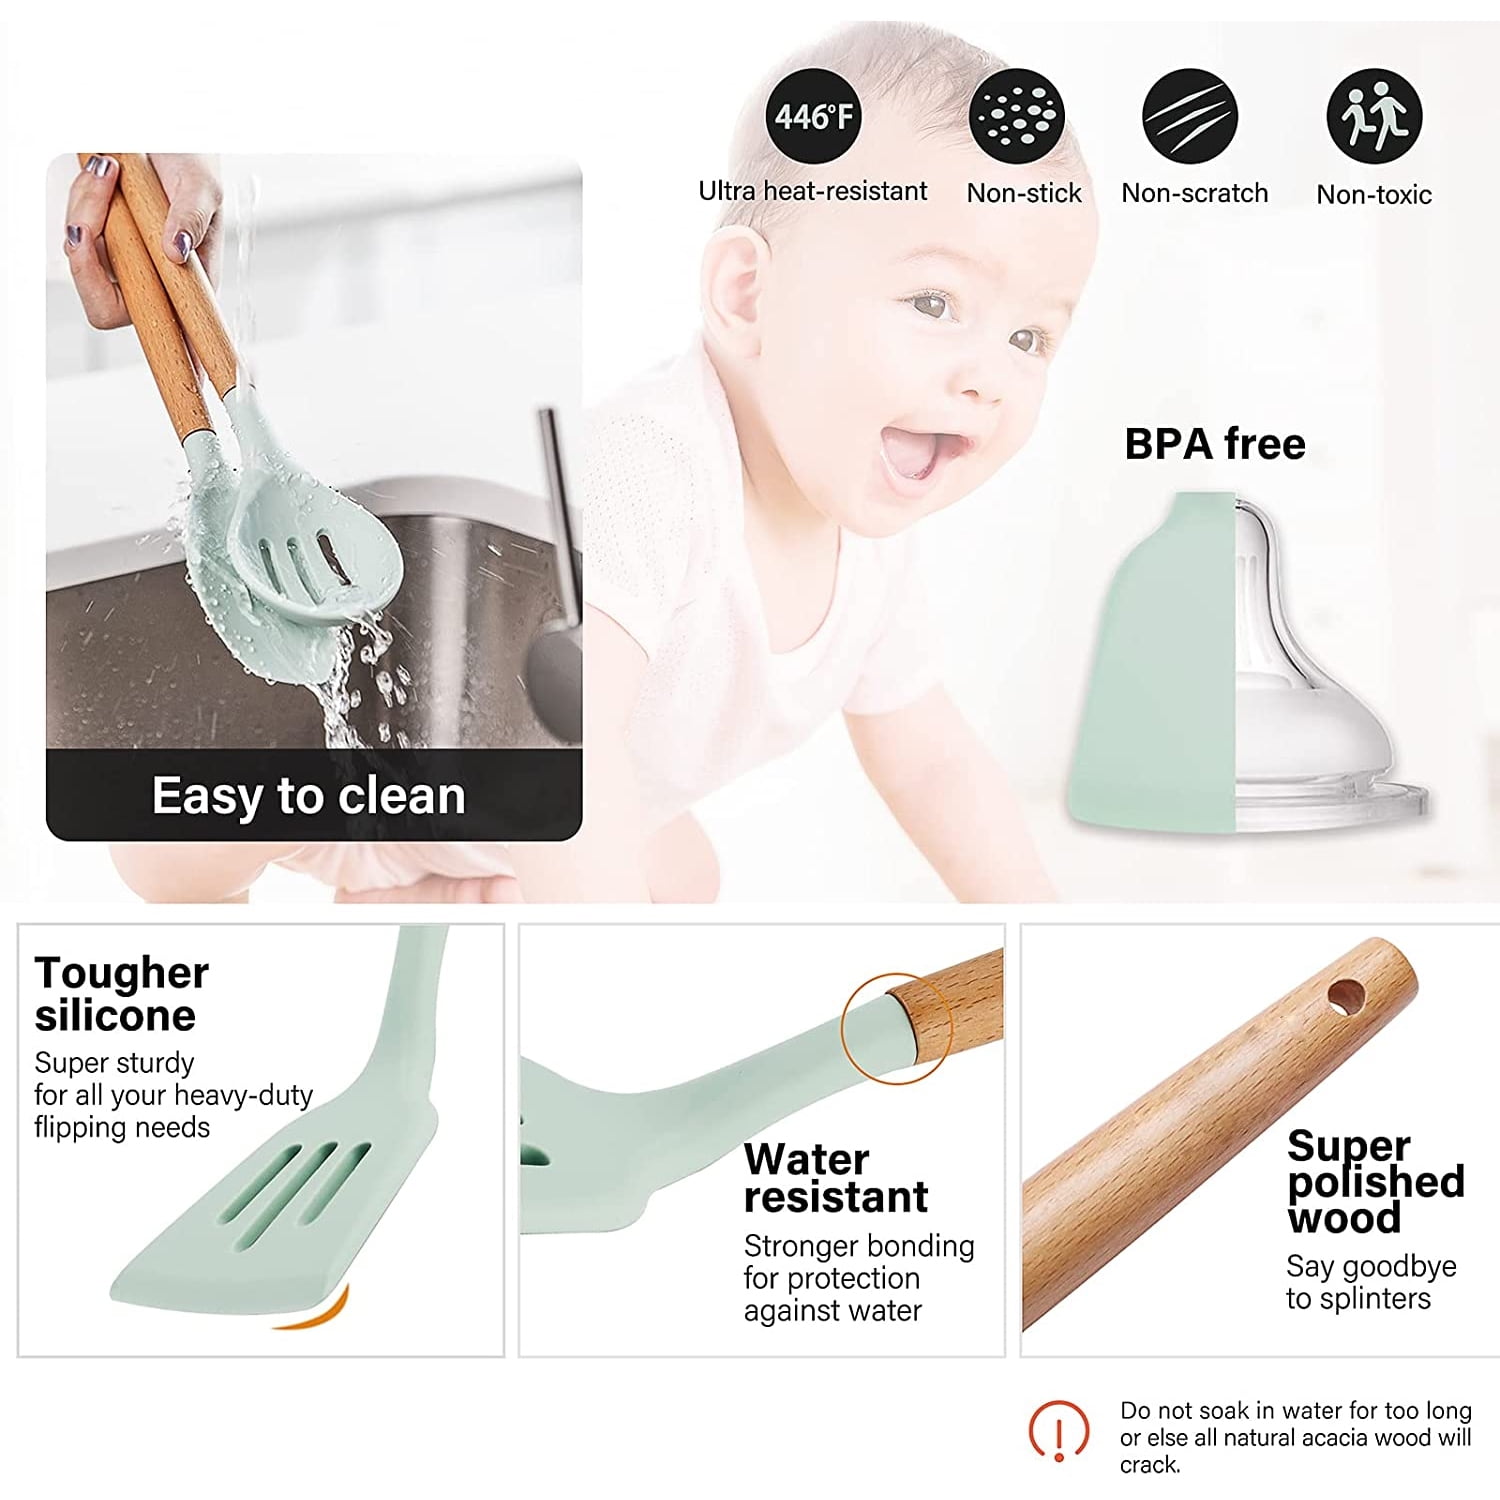  Silicone Cooking Utensils Set - 446°F Heat Resistant Silicone  Kitchen Utensils for Cooking,Kitchen Utensil Spatula Set w Wooden Handles  and Holder, BPA FREE Gadgets for Non-Stick Cookware (Khaki) : Home 